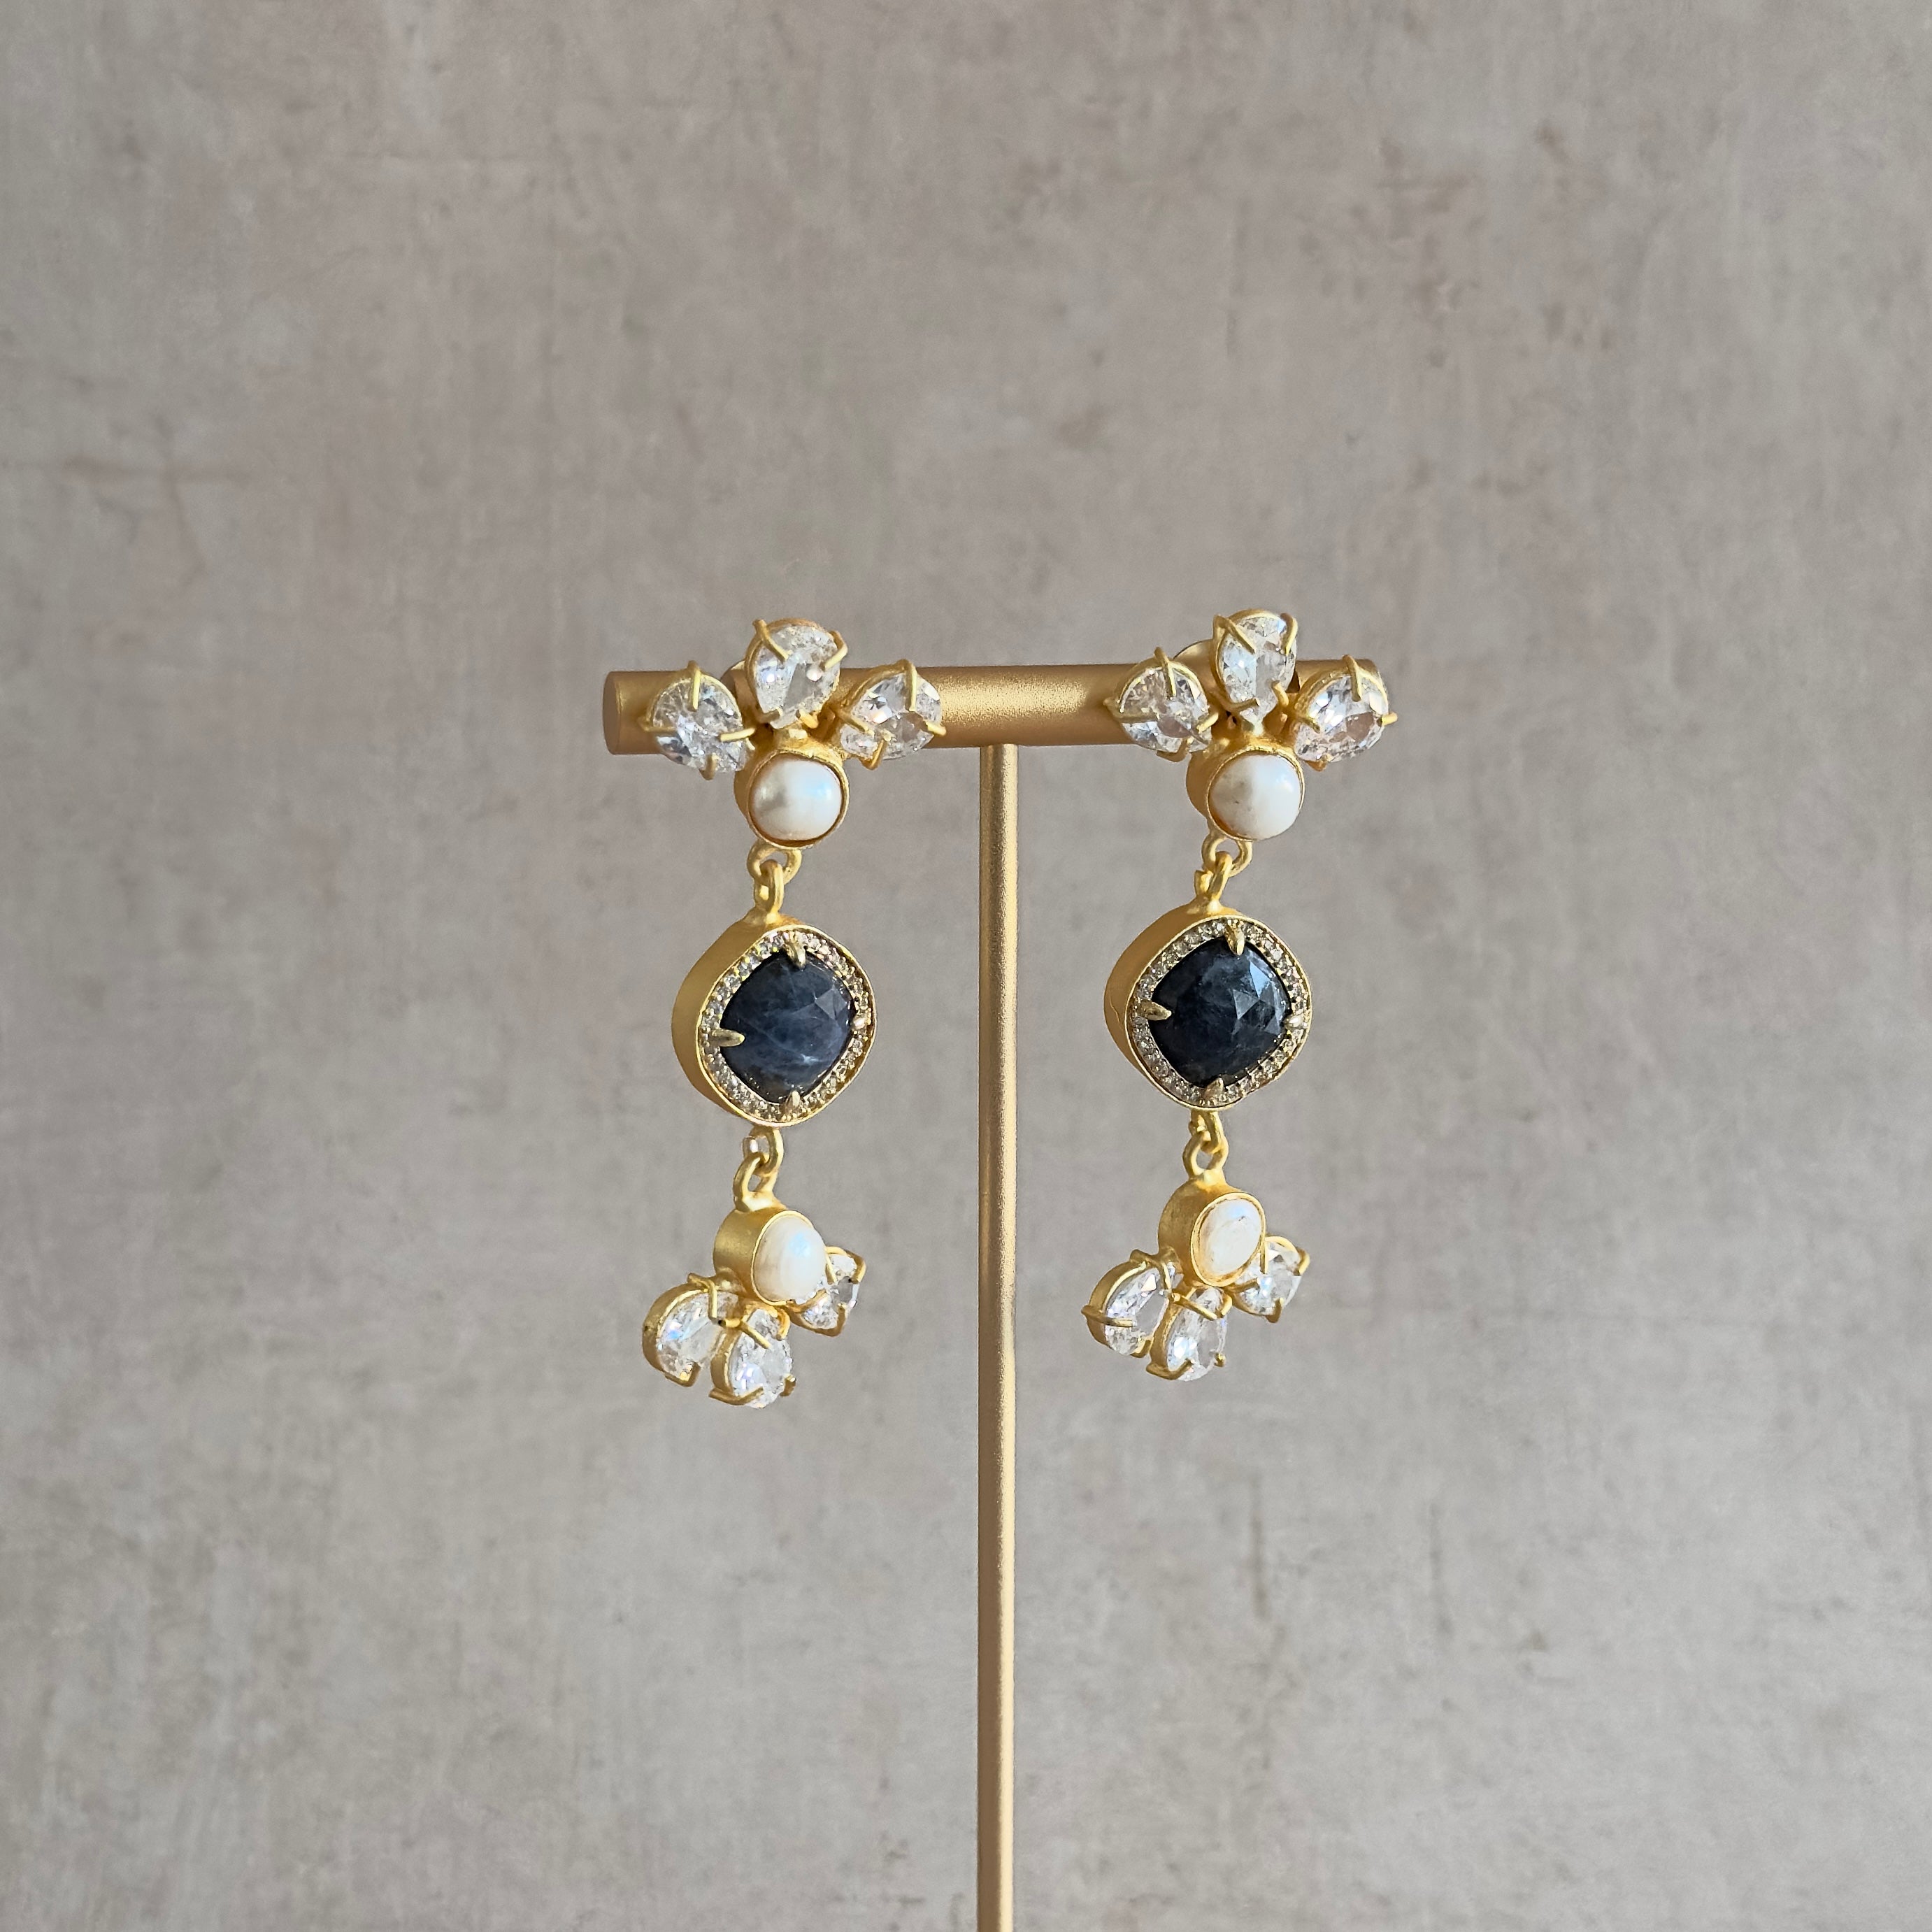 Introducing our Rifa Crystal Drop Earrings. These stunning earrings feature sparkling cz crystals and a pearl accent, complemented by a sleek black stone. Upgrade any outfit with these elegant and versatile earrings.